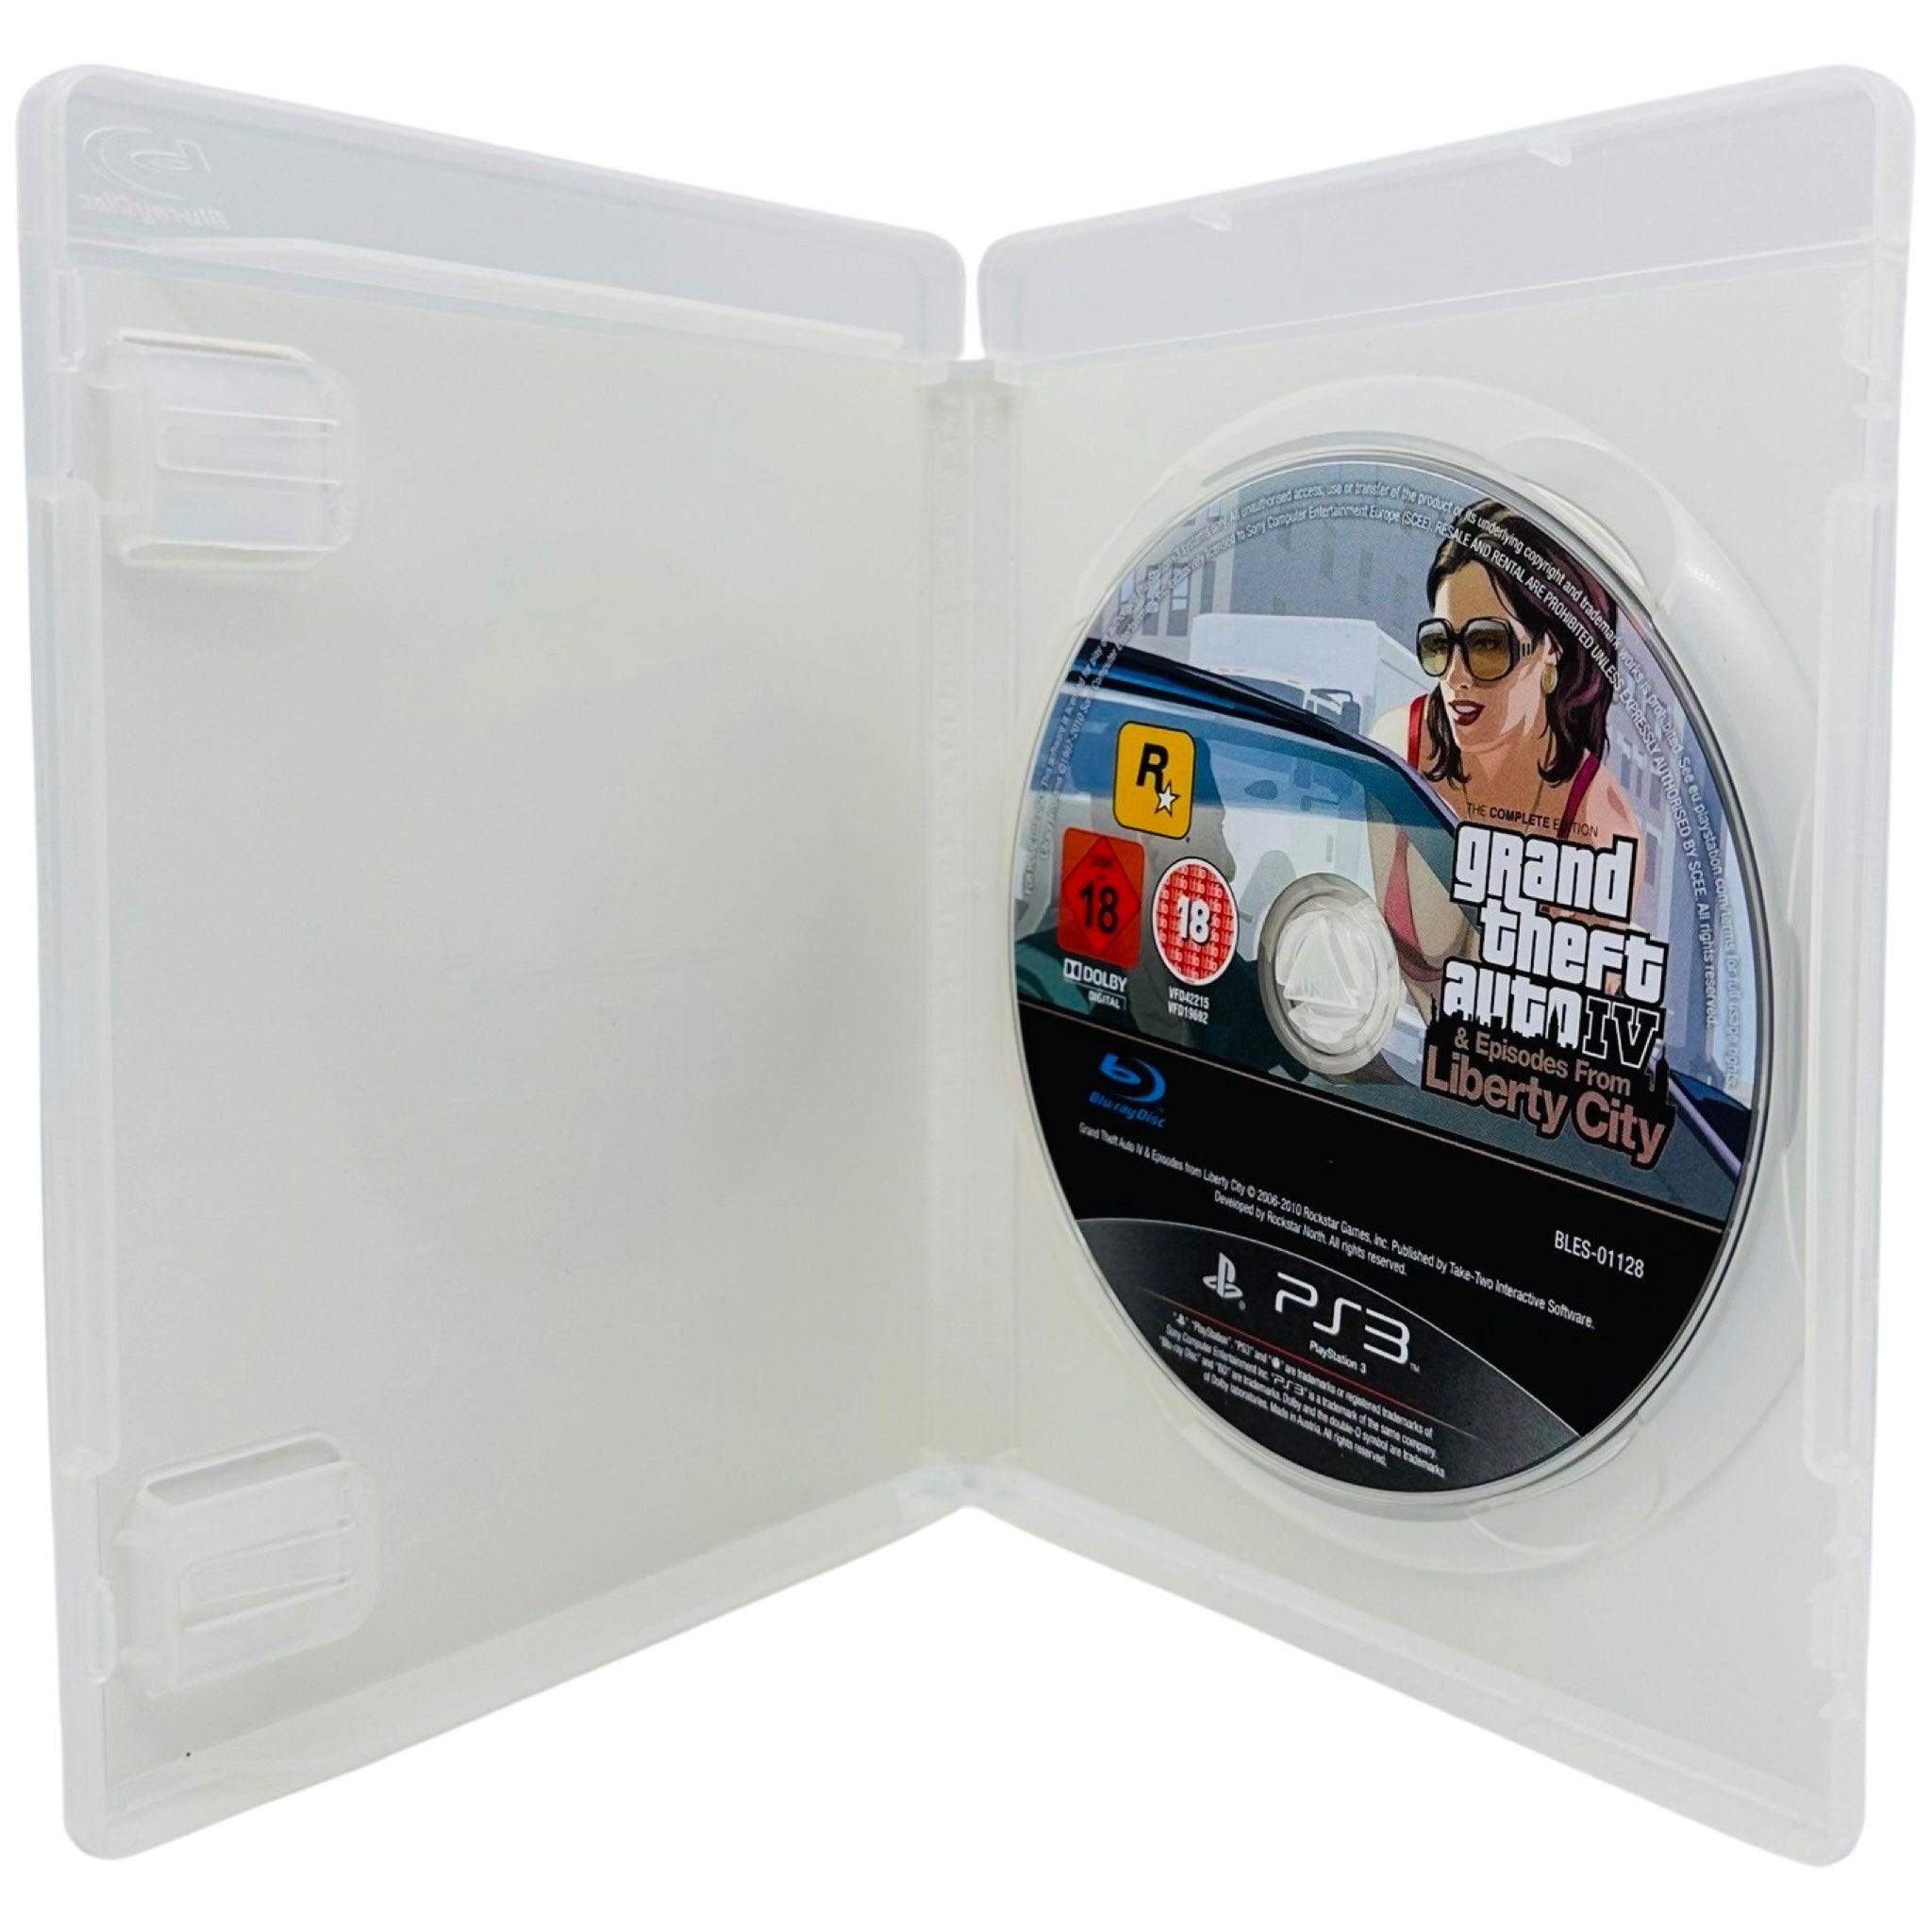 PS3: Grand Theft Auto: Episodes From Liberty City - RetroGaming.no